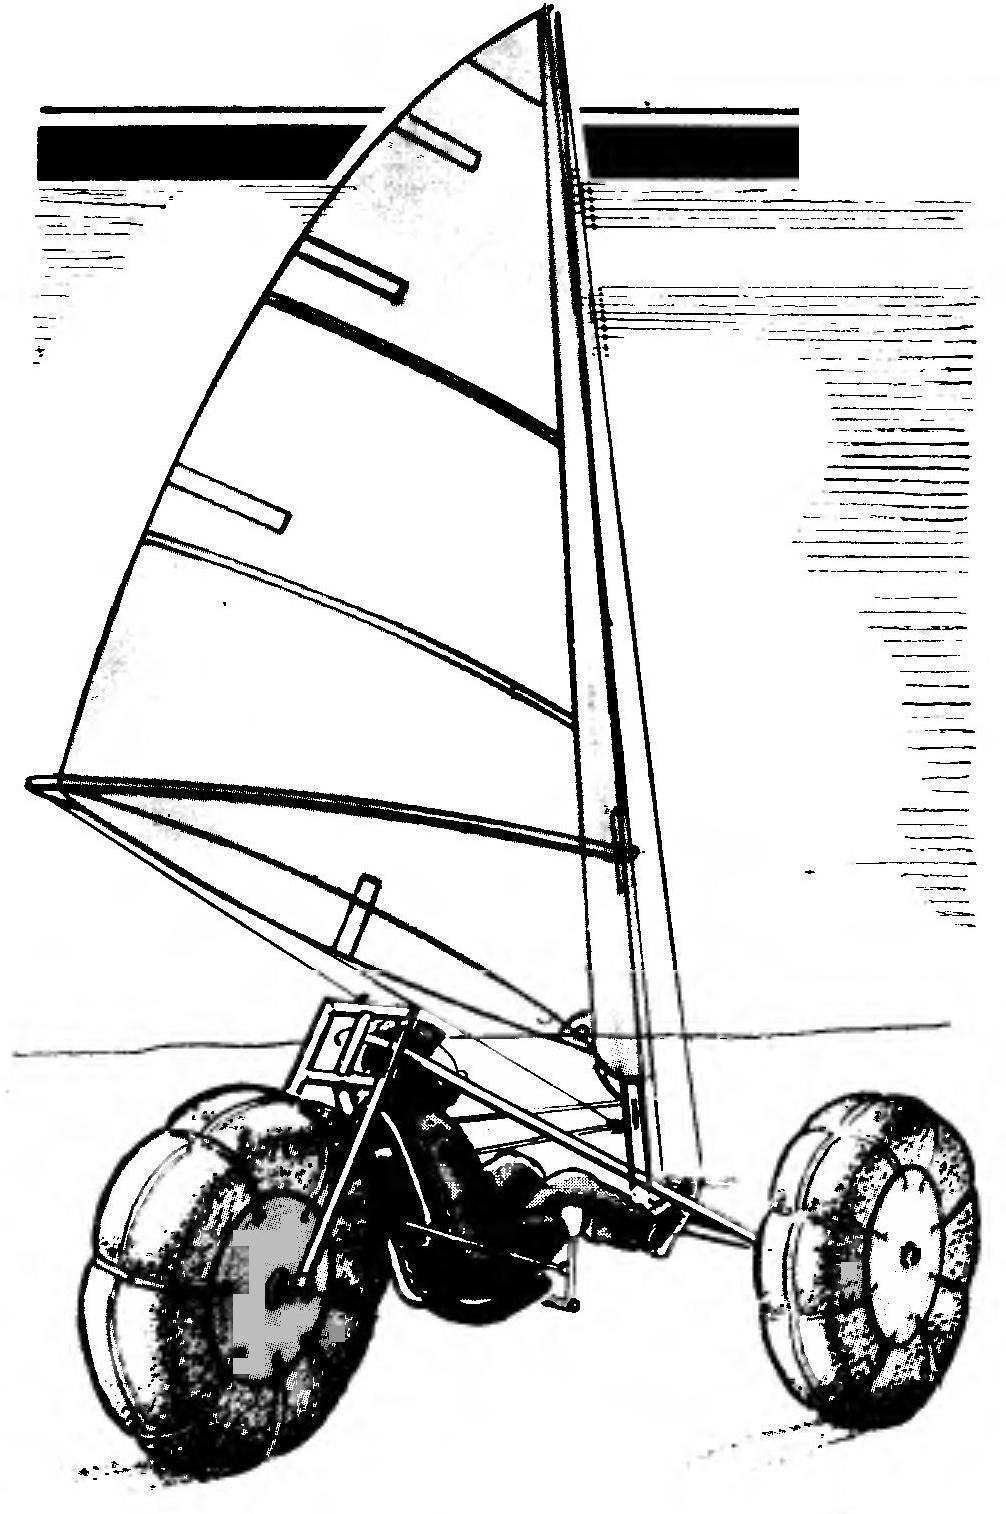 WINDROLLER IS A SAILING TRICYCLE